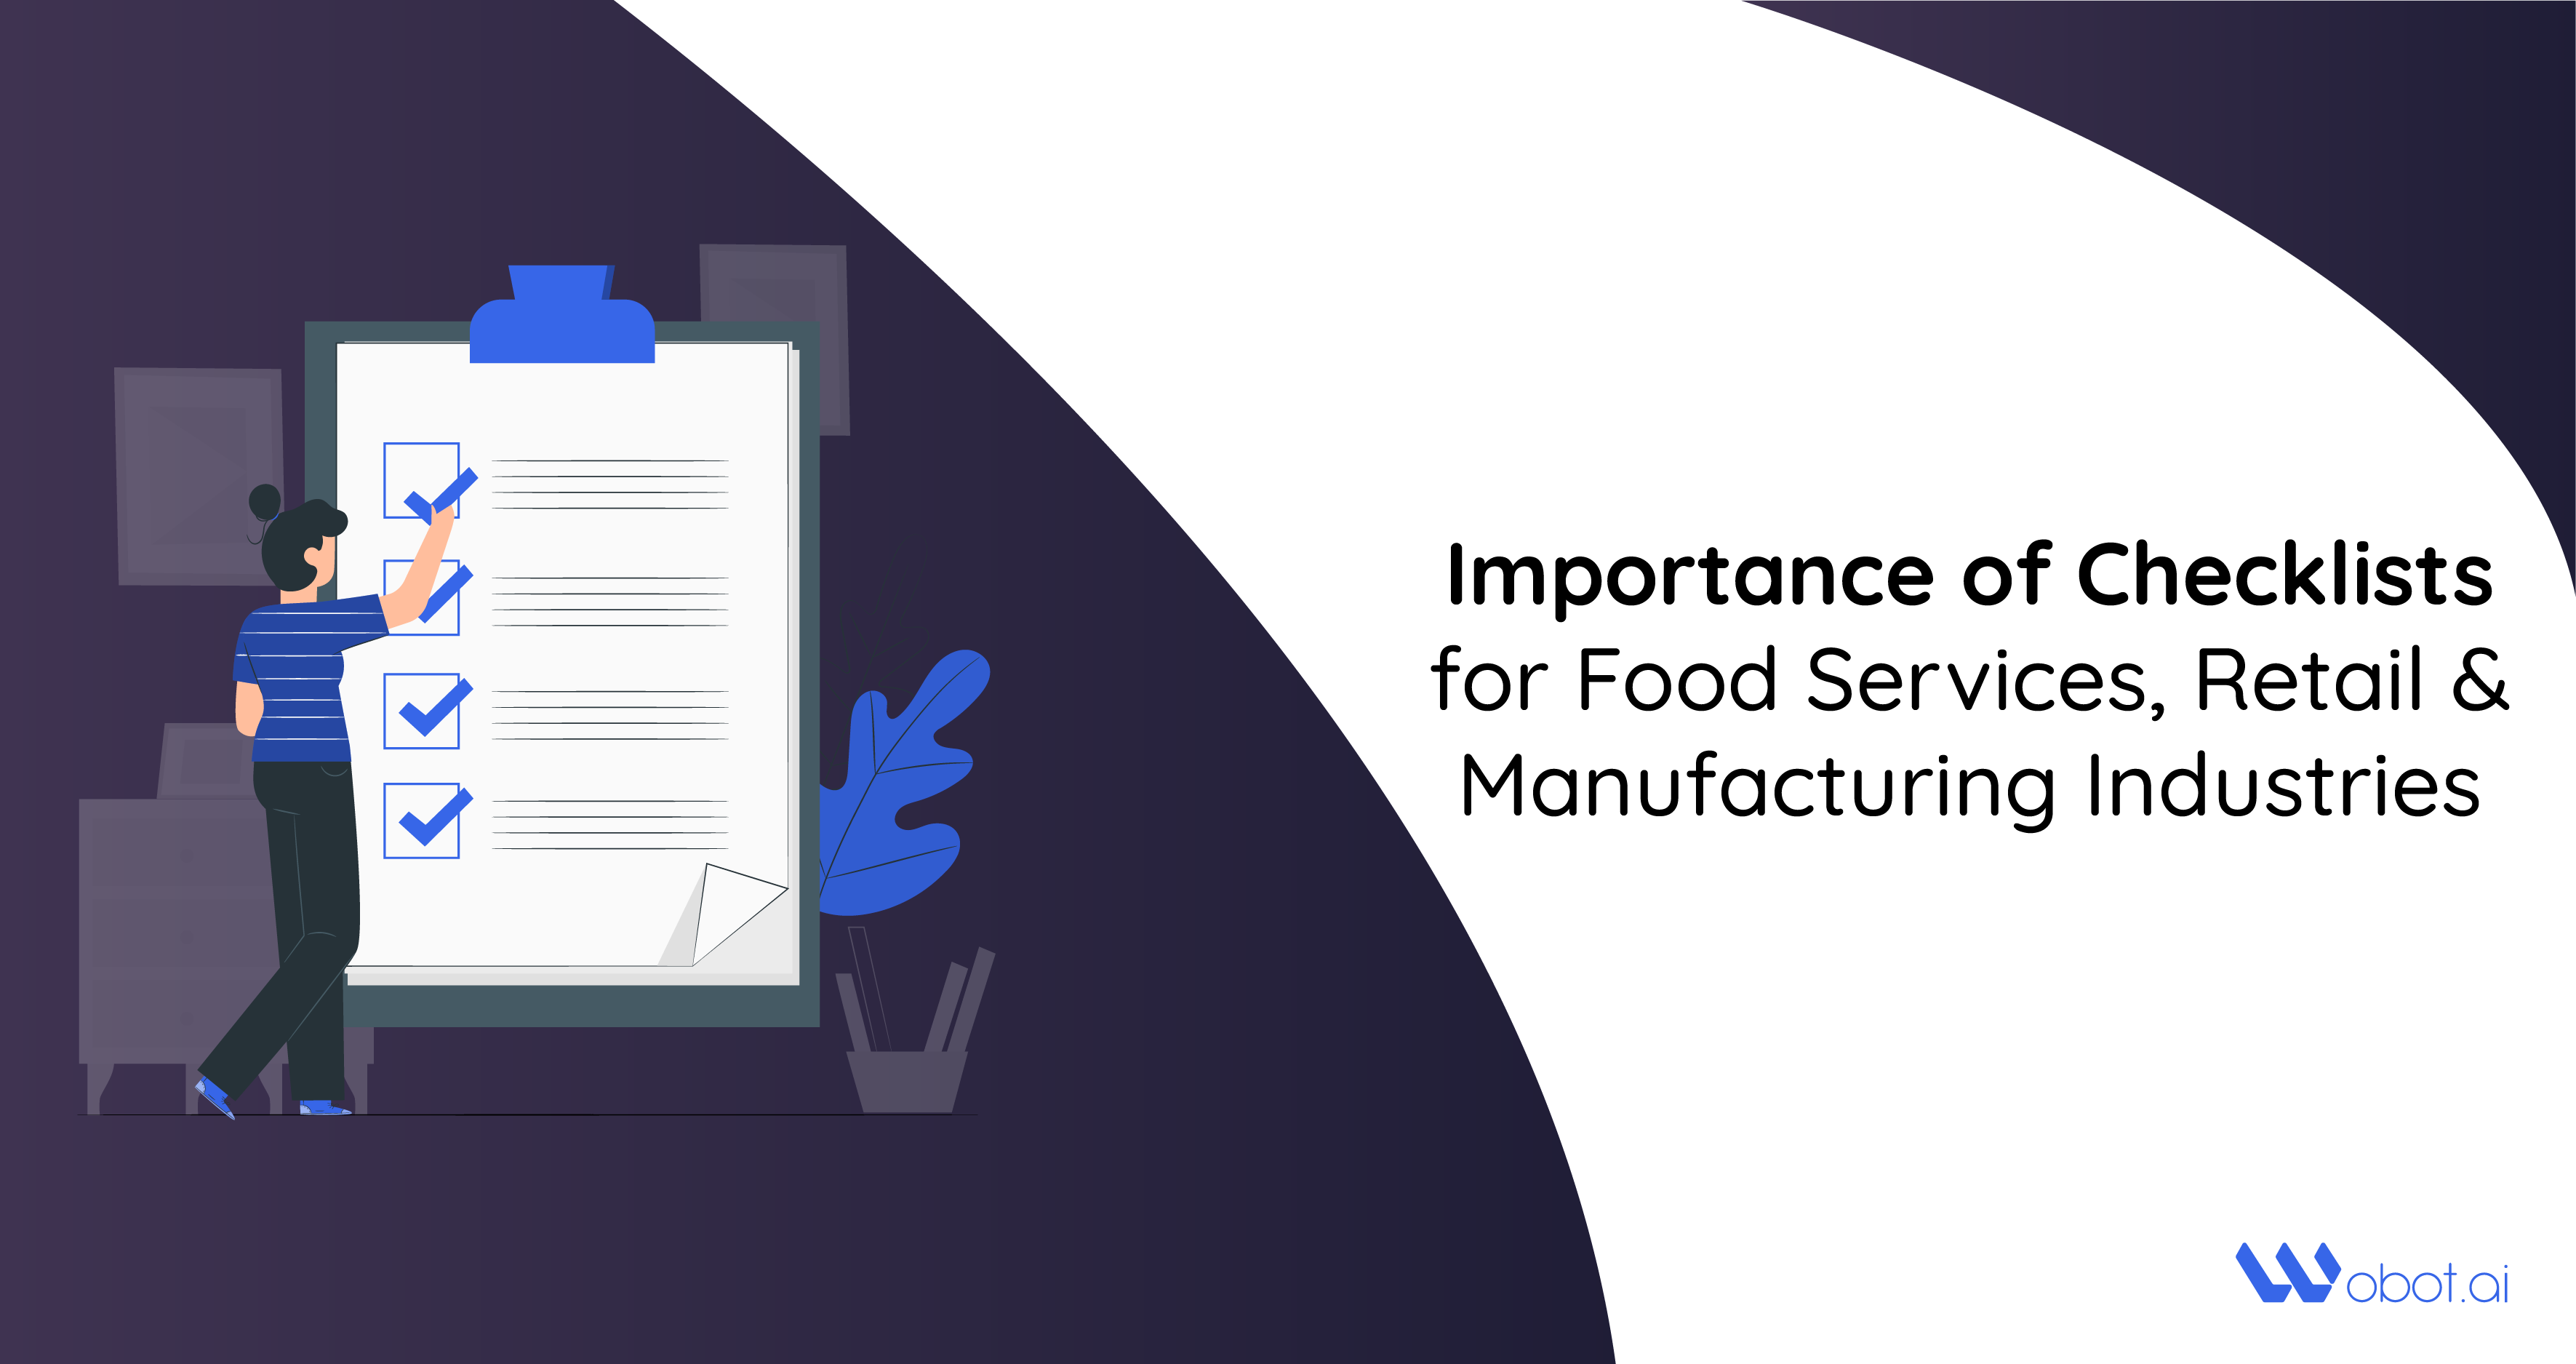 Importance of Checklists for Food Services, Retail & Manufacturing Industries